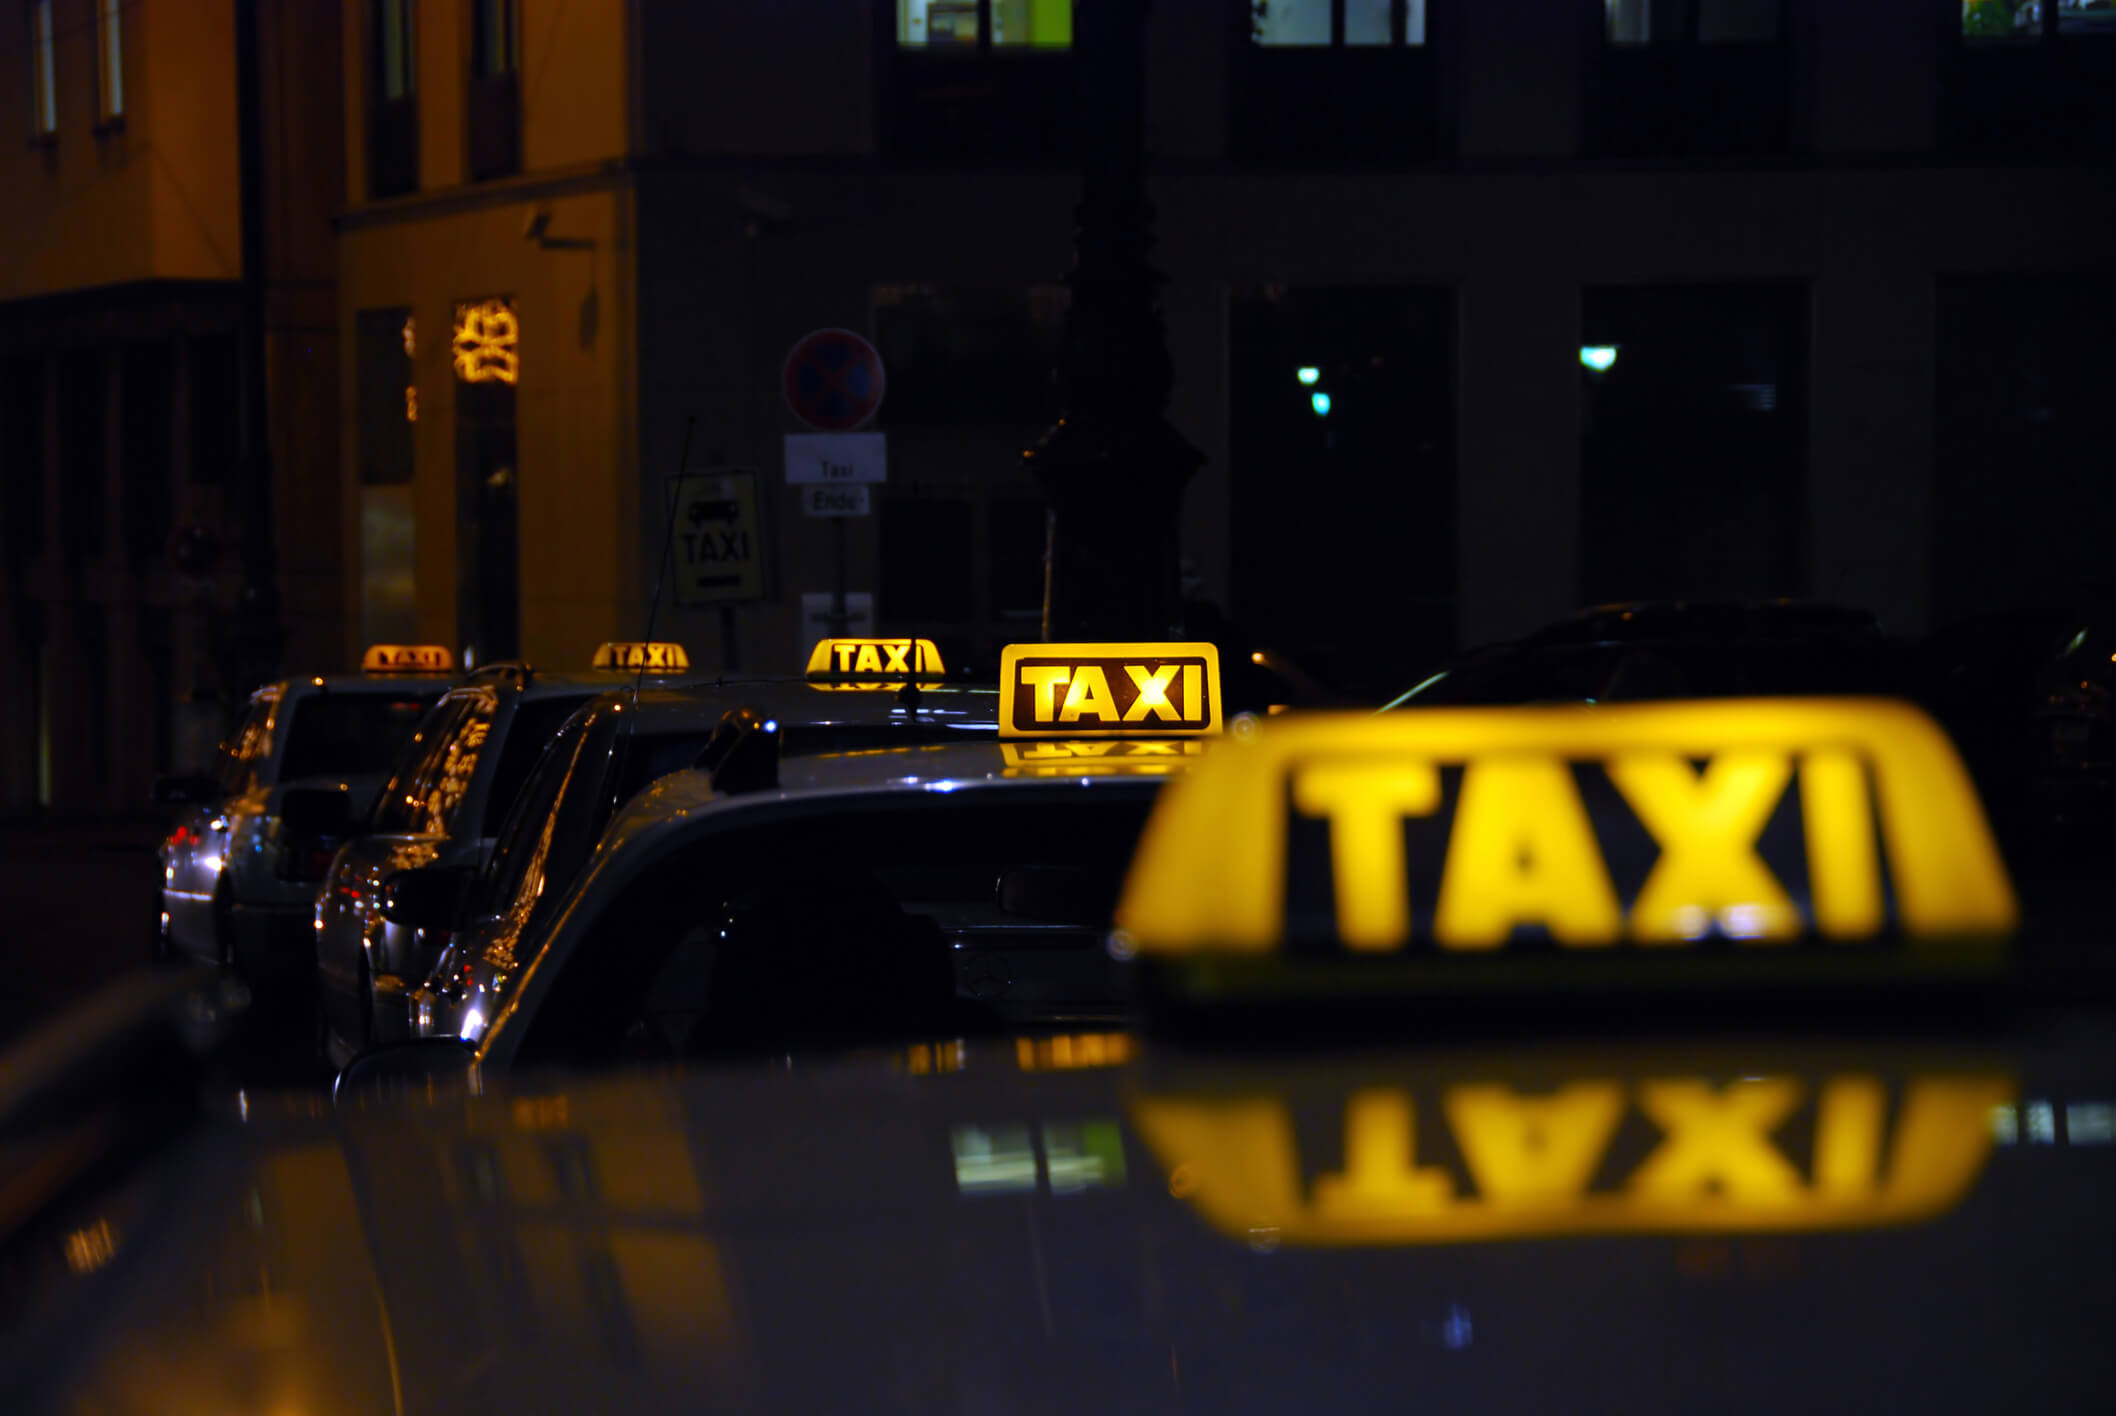 24hr taxis, taxis waiting at night